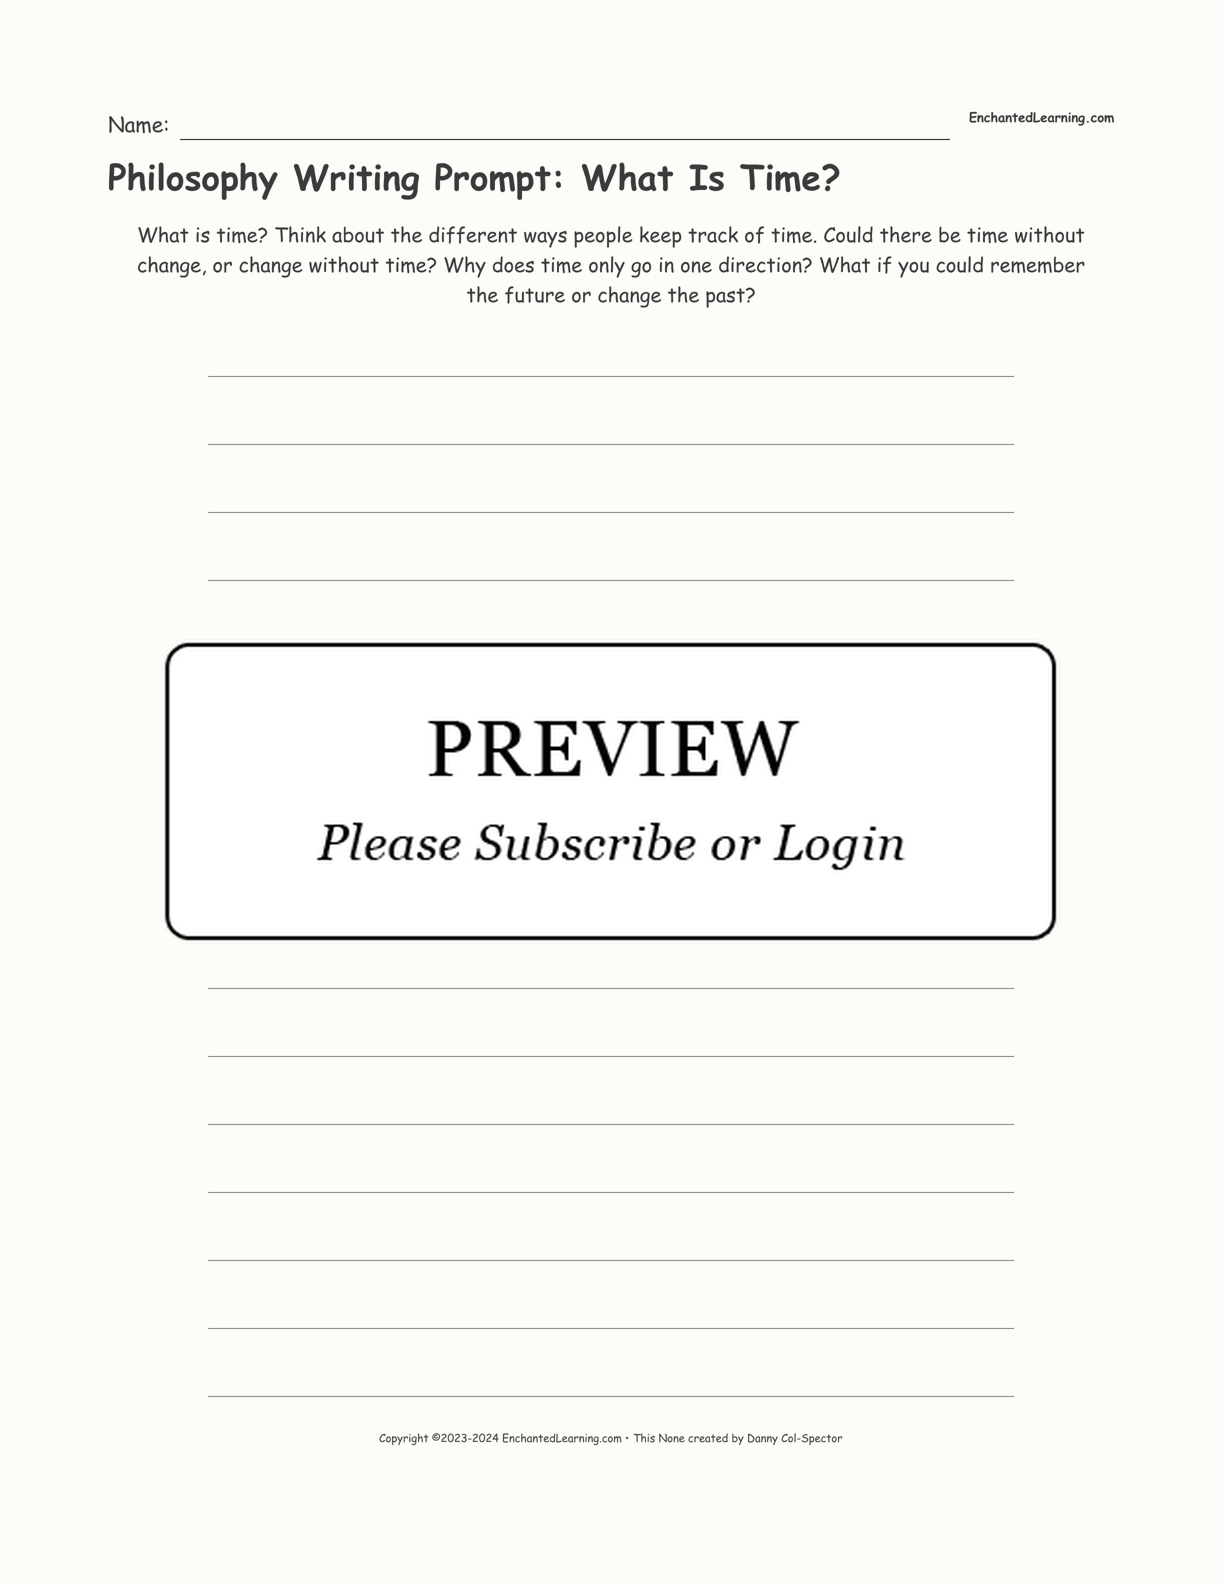 Philosophy Writing Prompt: What Is Time? interactive printout page 1